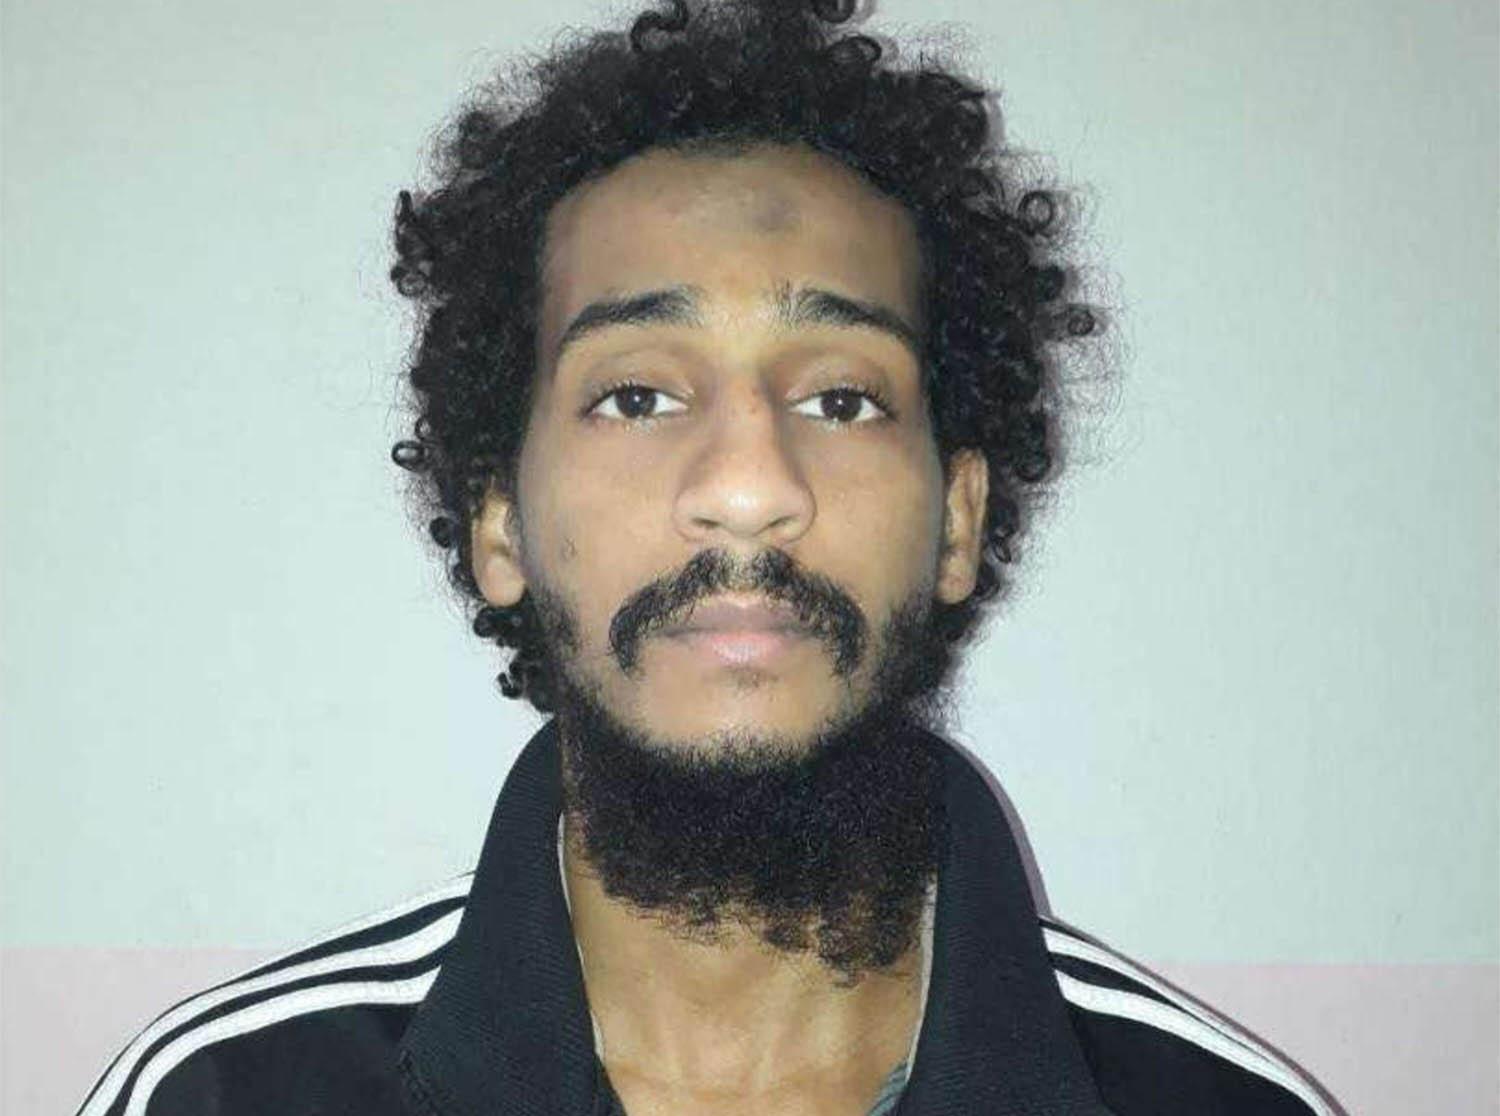 Elsheikh was part of an Islamic State cell, nicknamed "The Beatles" for their British accents